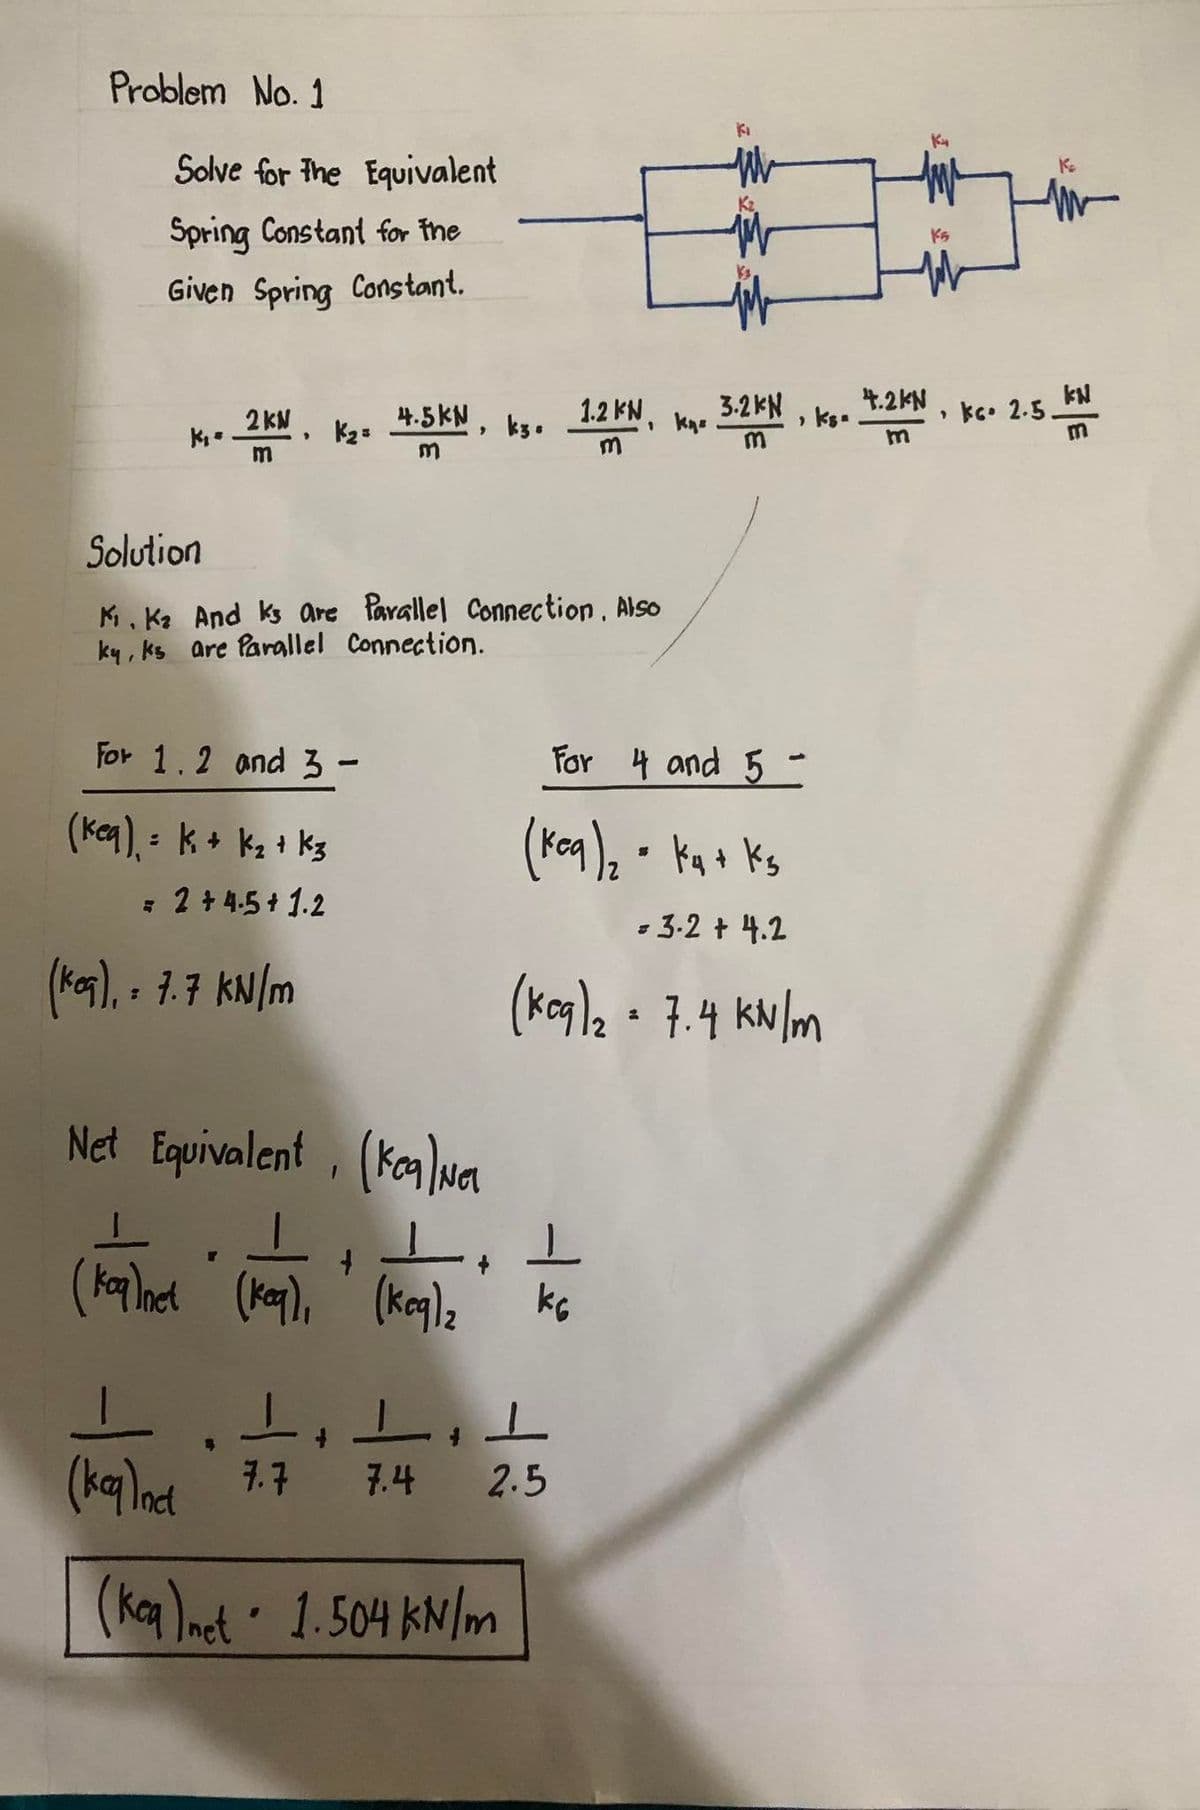 Problem No. 1
Solve for the Equivalent
Spring Constant for the
Given Spring Constant.
K₁ =
2KN,
m
Solution
K₁. K² And ks are Parallel Connection. Also
ky, ks are Parallel Connection.
For 1.2 and 3 -
(keq) = K + K₂ + K3
= 2 + 4.5+ 1.2
K₂= 4.5KN, ks. 1.2 KN, kn. 3.2KN, ks.
m
m
m
(keq), = 7.7 kN/m
Net Equivalent, (ken)Ne
T
(koq)net (keq),
1₁ 1
KG
+
(keq), (keq)₂
ki
For 4 and 5 -
(keq)₂ = k₁ + ks
= 3.2 + 4.2
(keq)₂ = 7.4 kN/m
1.1.1.1
(keq)nct 7.7 7.4 2.5
(keq)net 1.504 kN/m
4.2KN
m
Ks
K₂
ke 2.5-